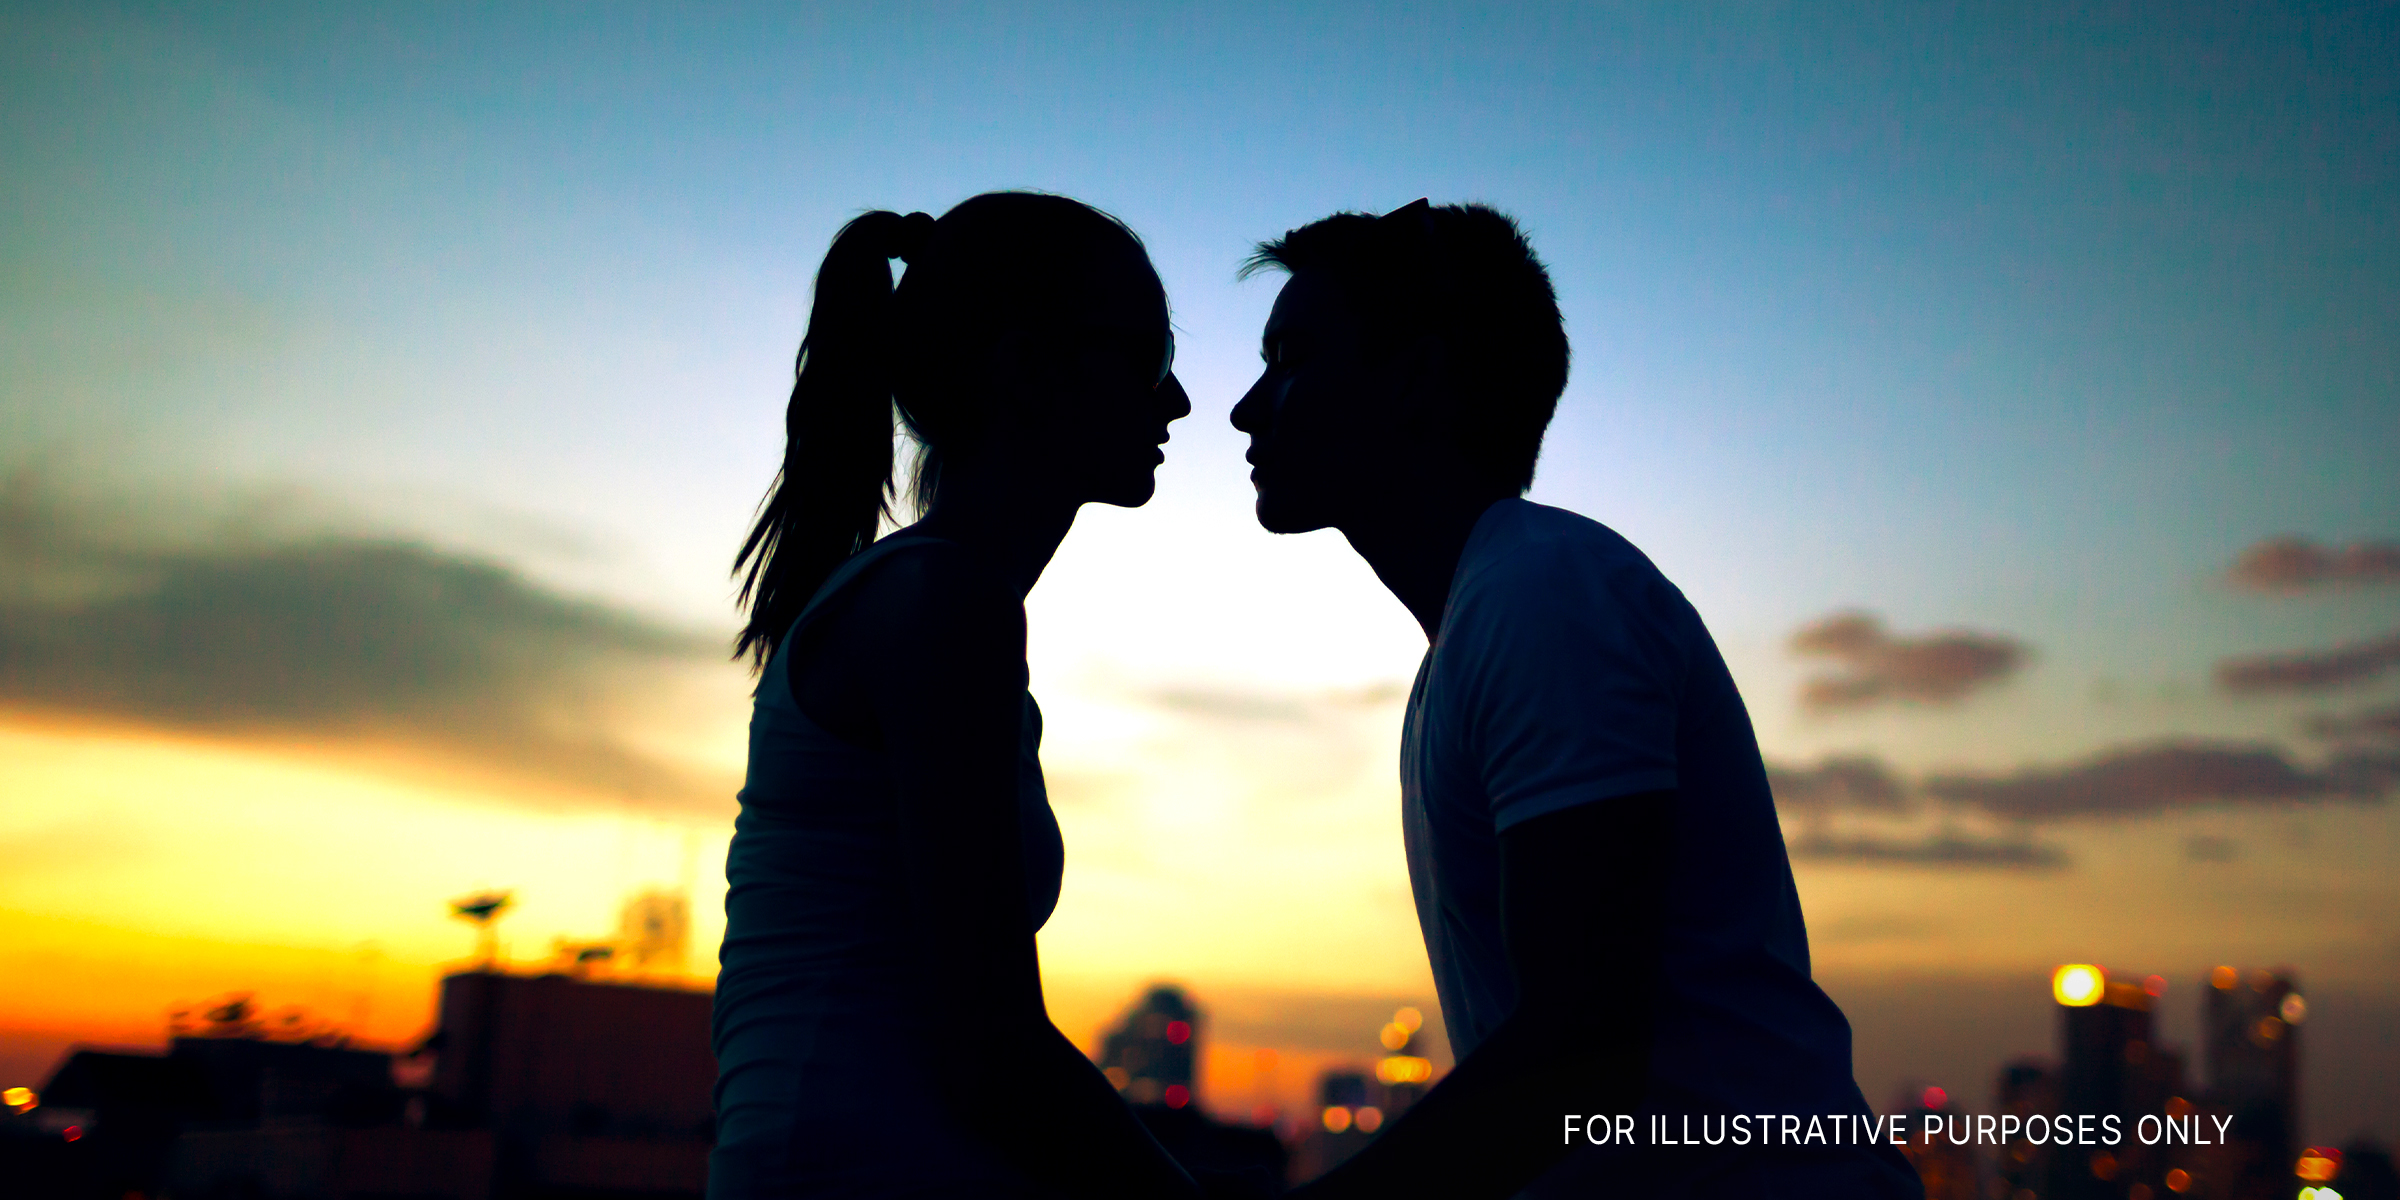 Silhouette photo of a young couple leaning in for a kiss during sunset. | Source: Shutterstock